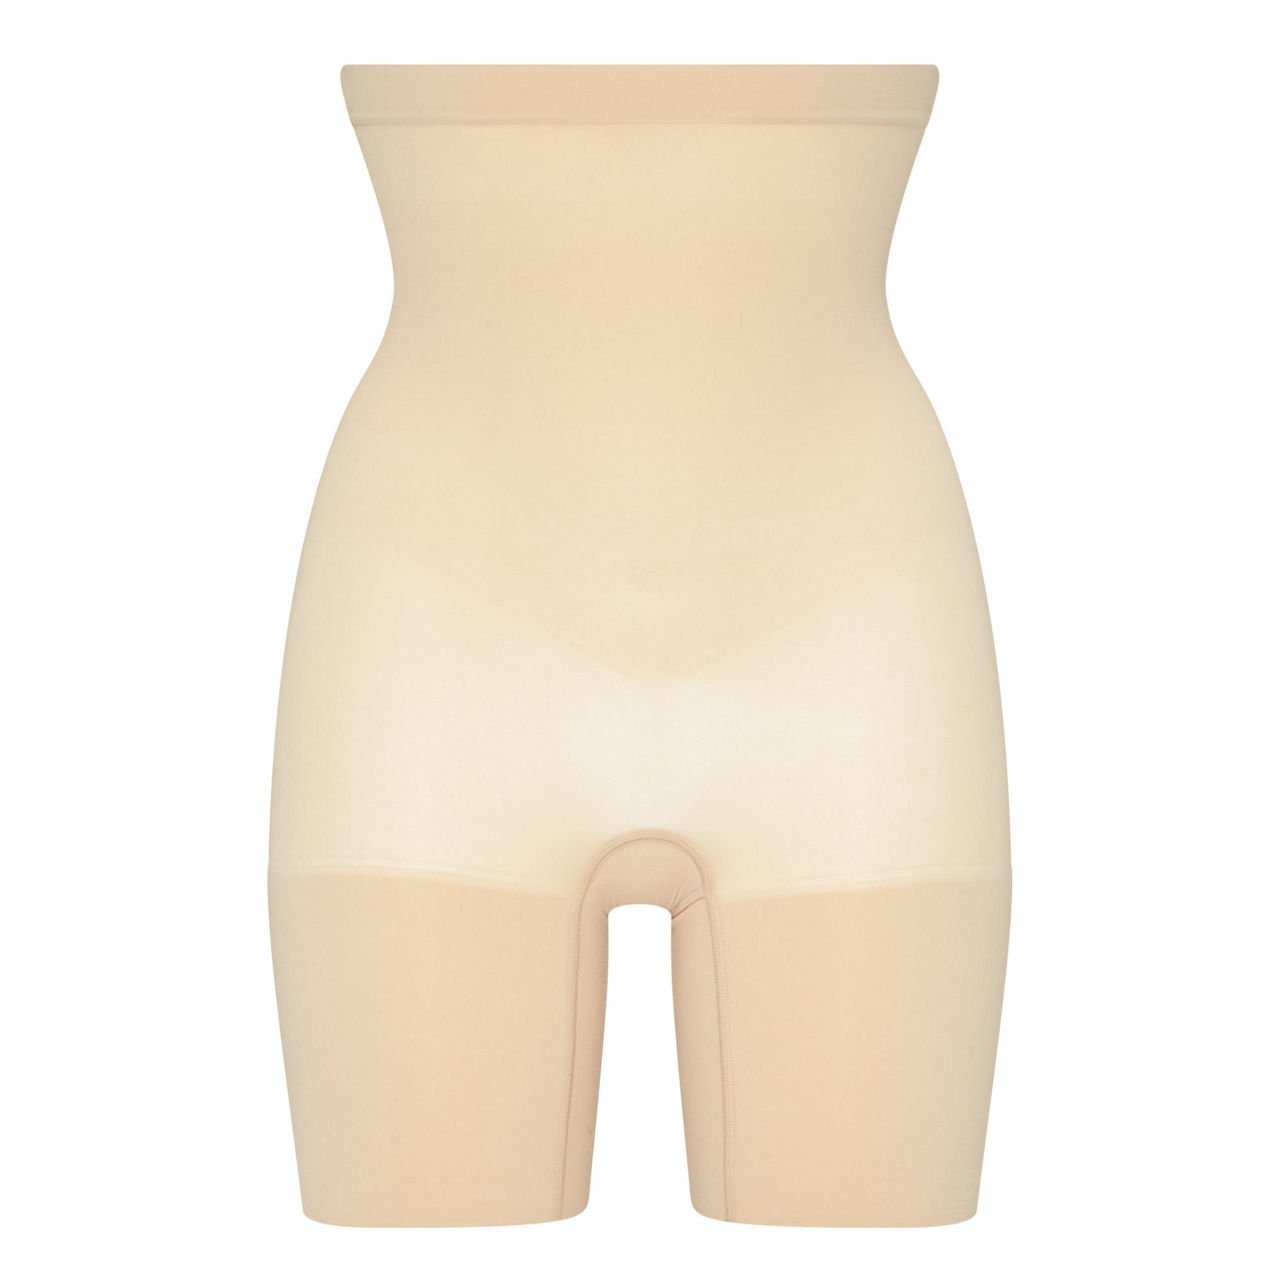 Spanx Power Short, also available extended sizes